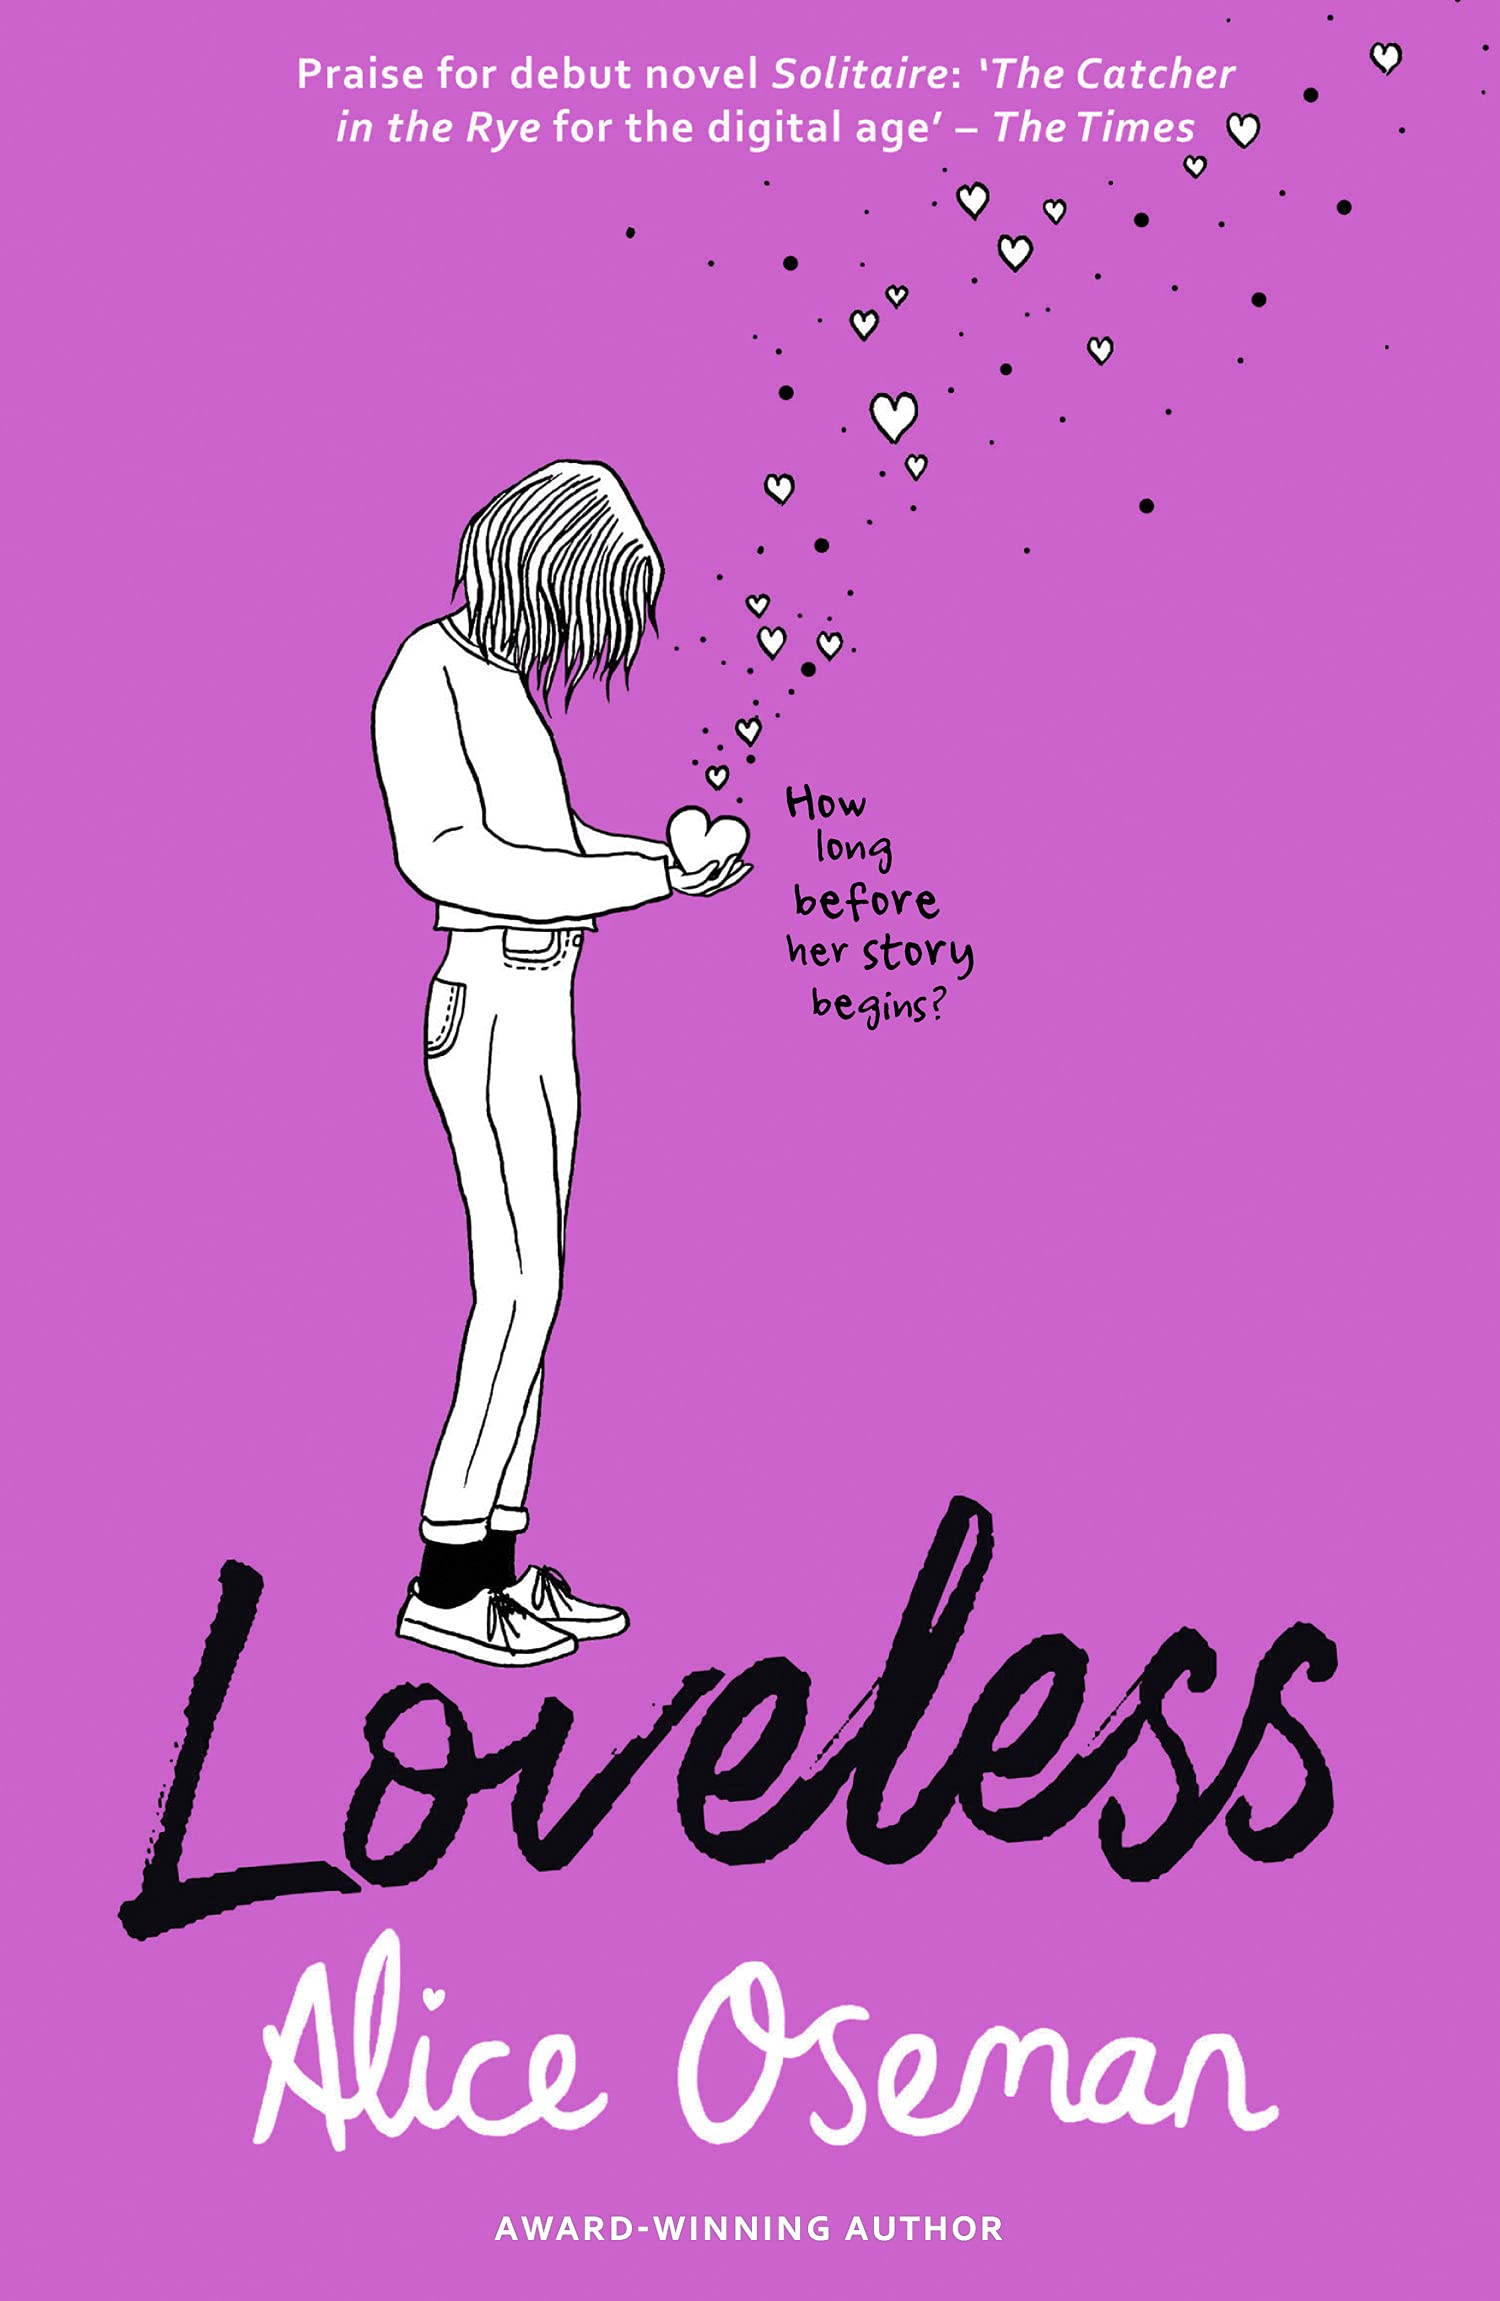 Should you read this next? A book review on Loveless by Alice Oseman